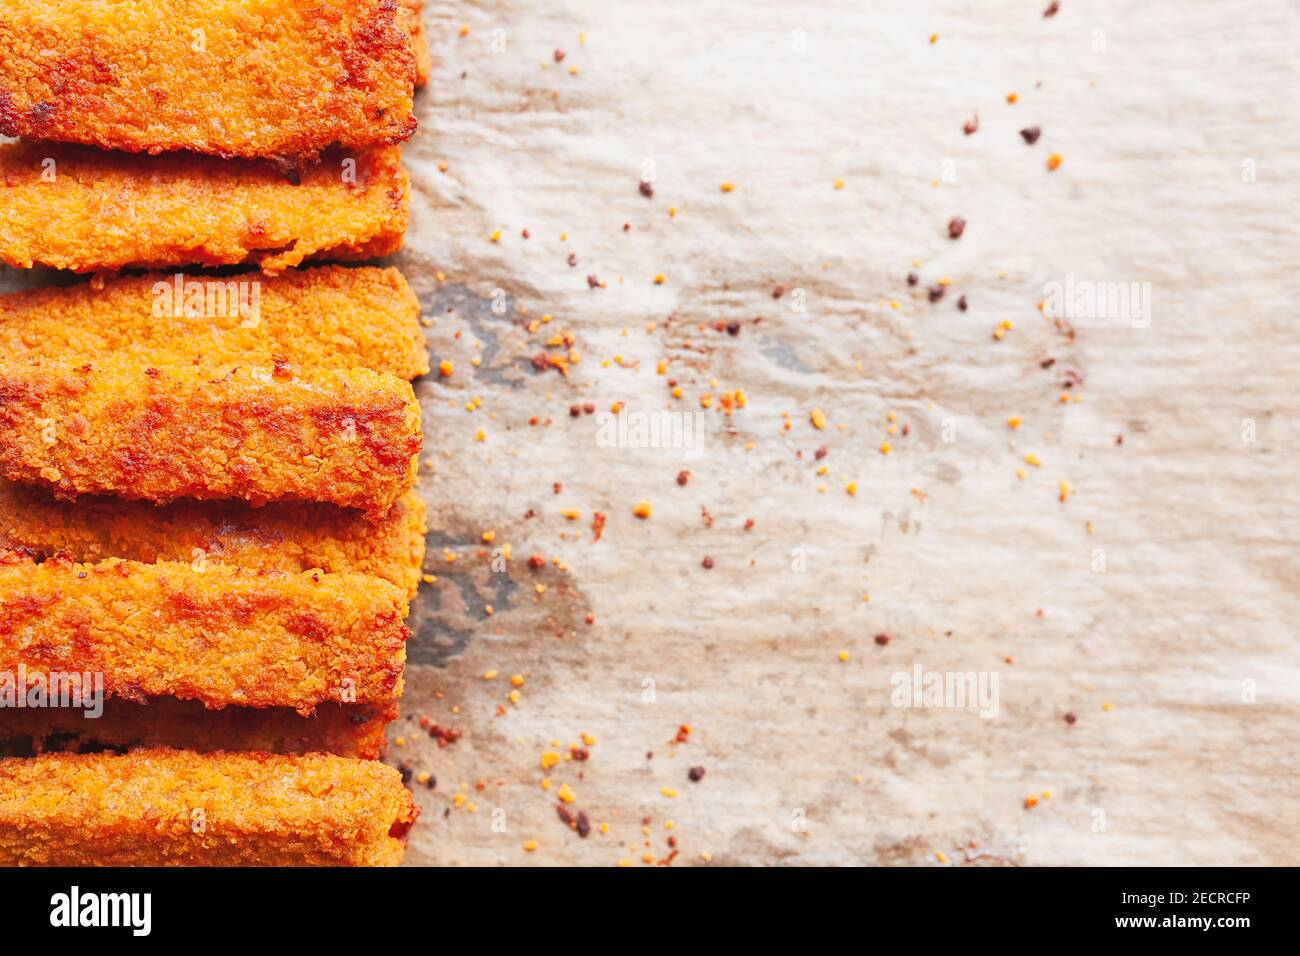 Deep fried fish fingers on greasy parchment paper and some crumbs, copy space on right side Stock Photo